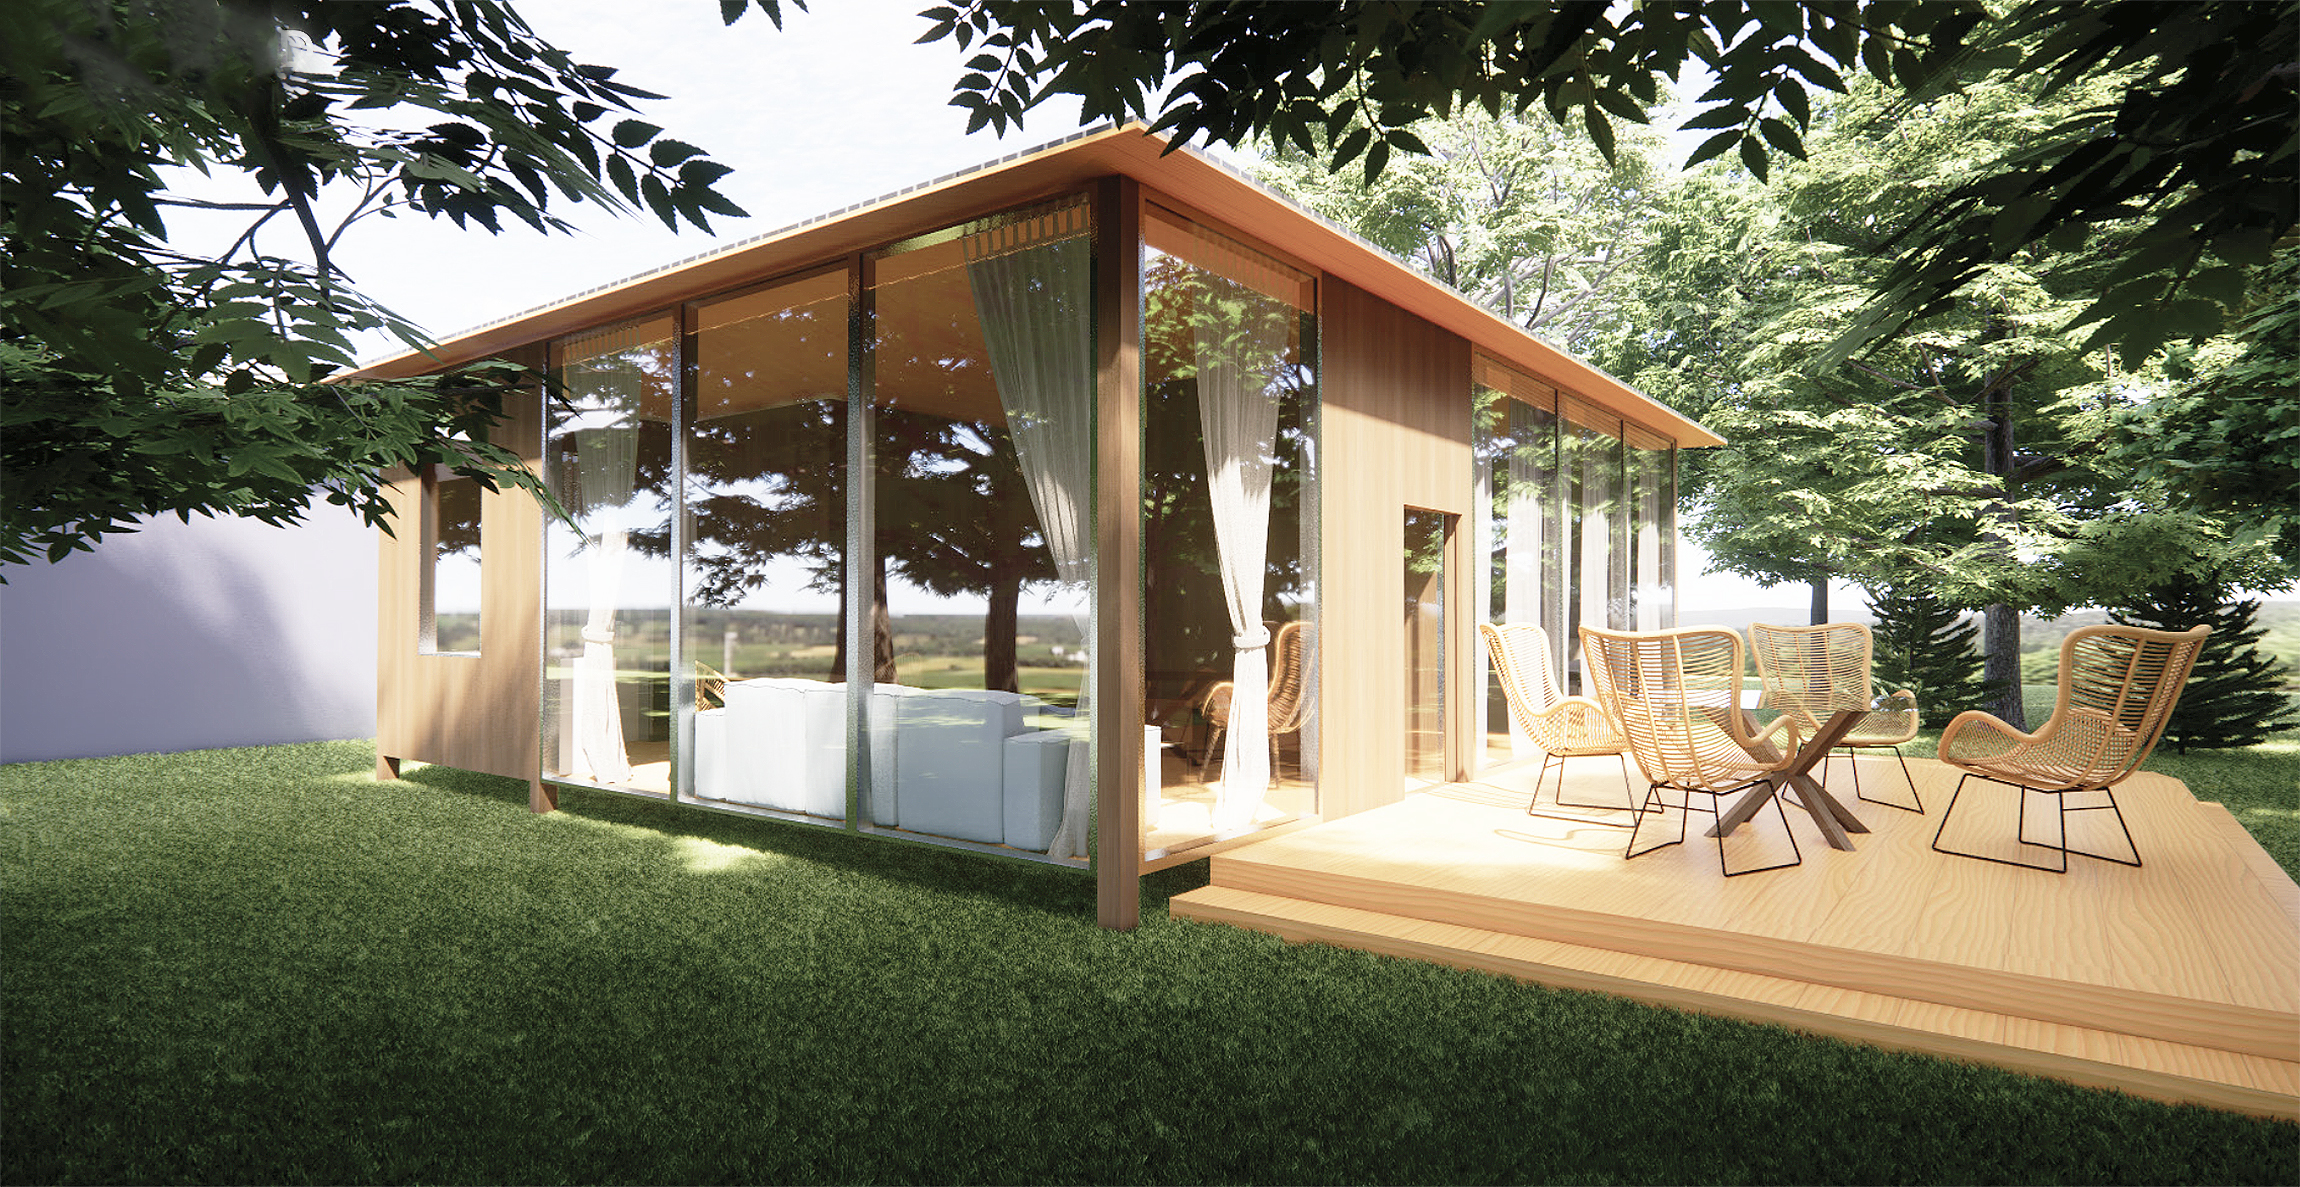 rendering of a backyard ADU with mostly glass walls